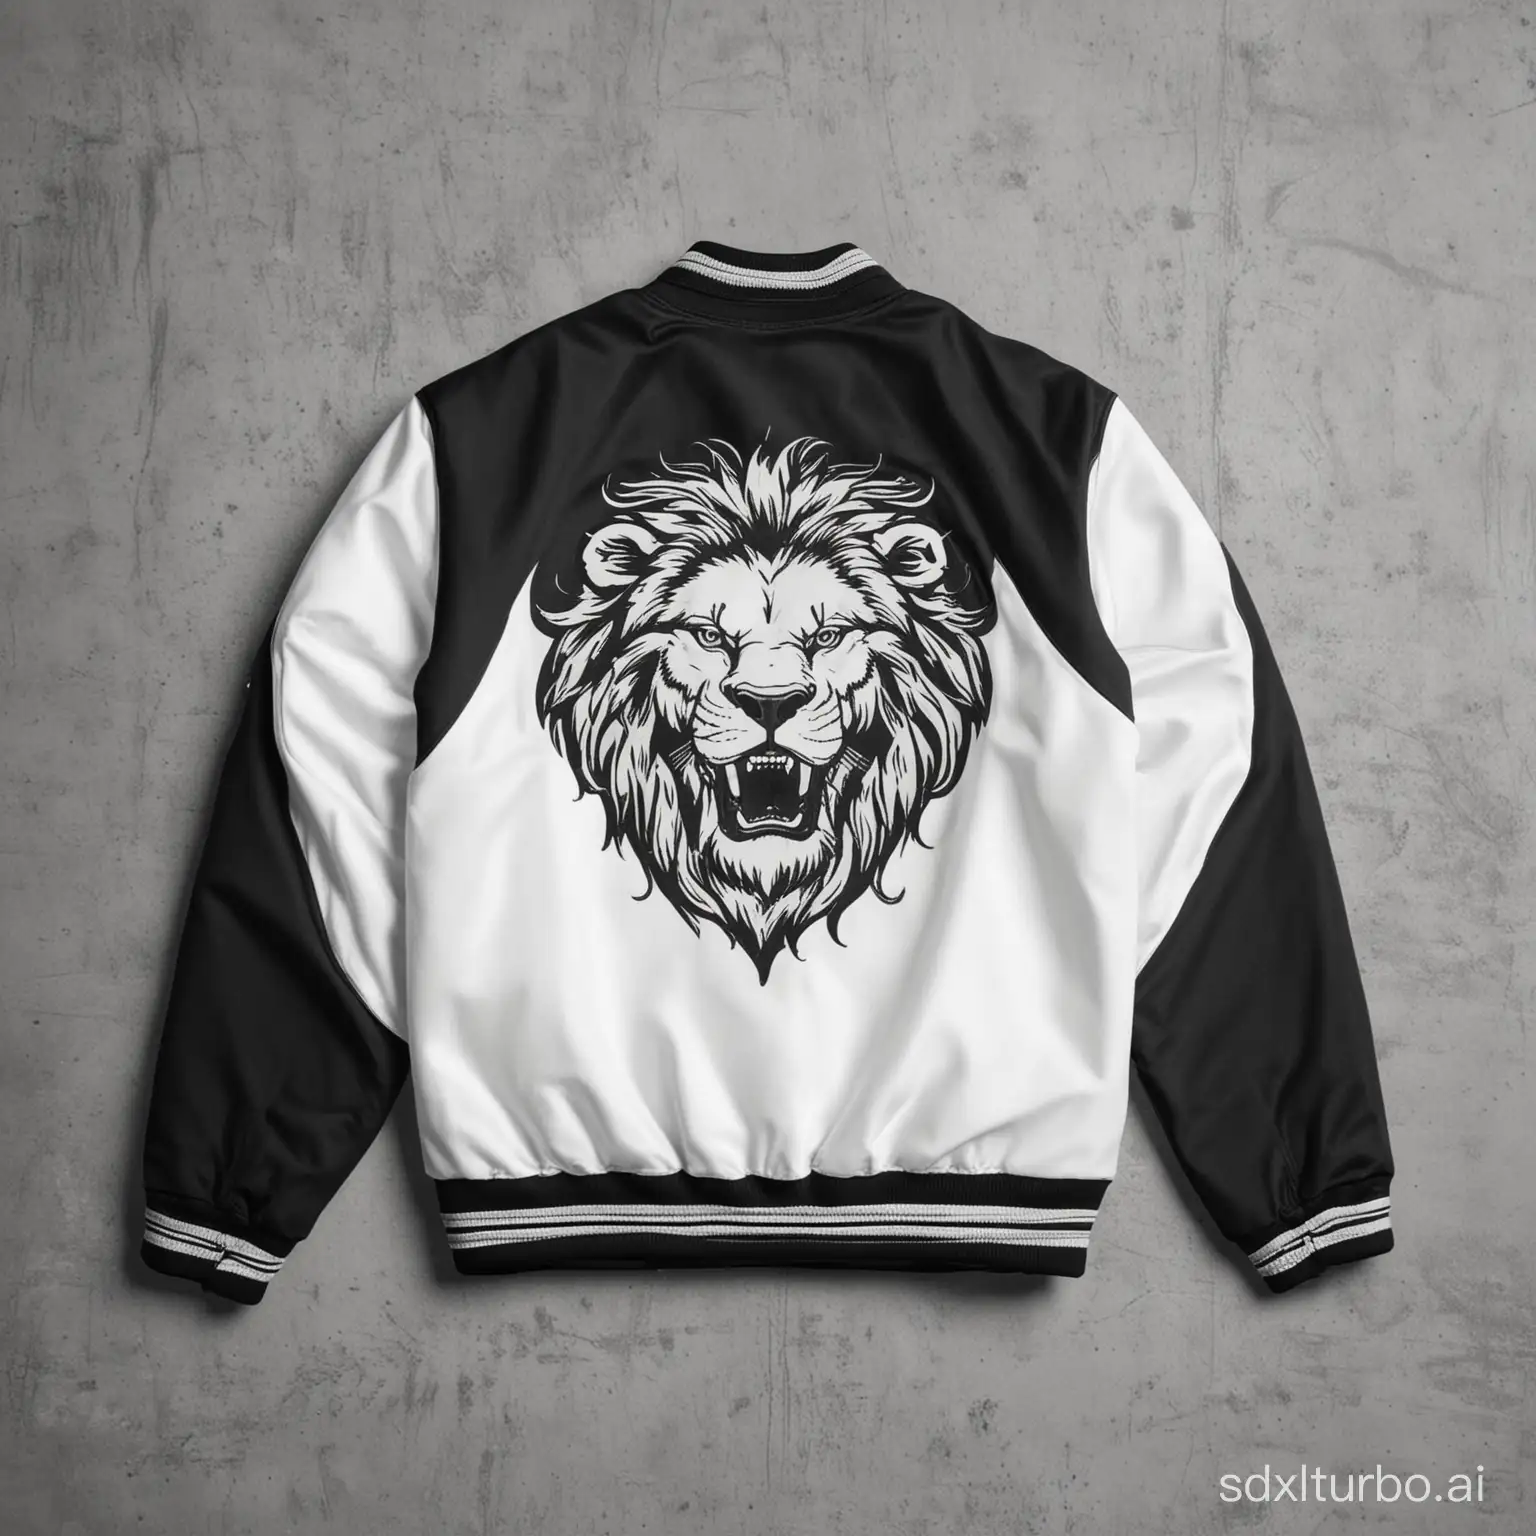 a varsity jacket in black and white sleeves and in the back of the jacket a simple a simple white logo of a lion